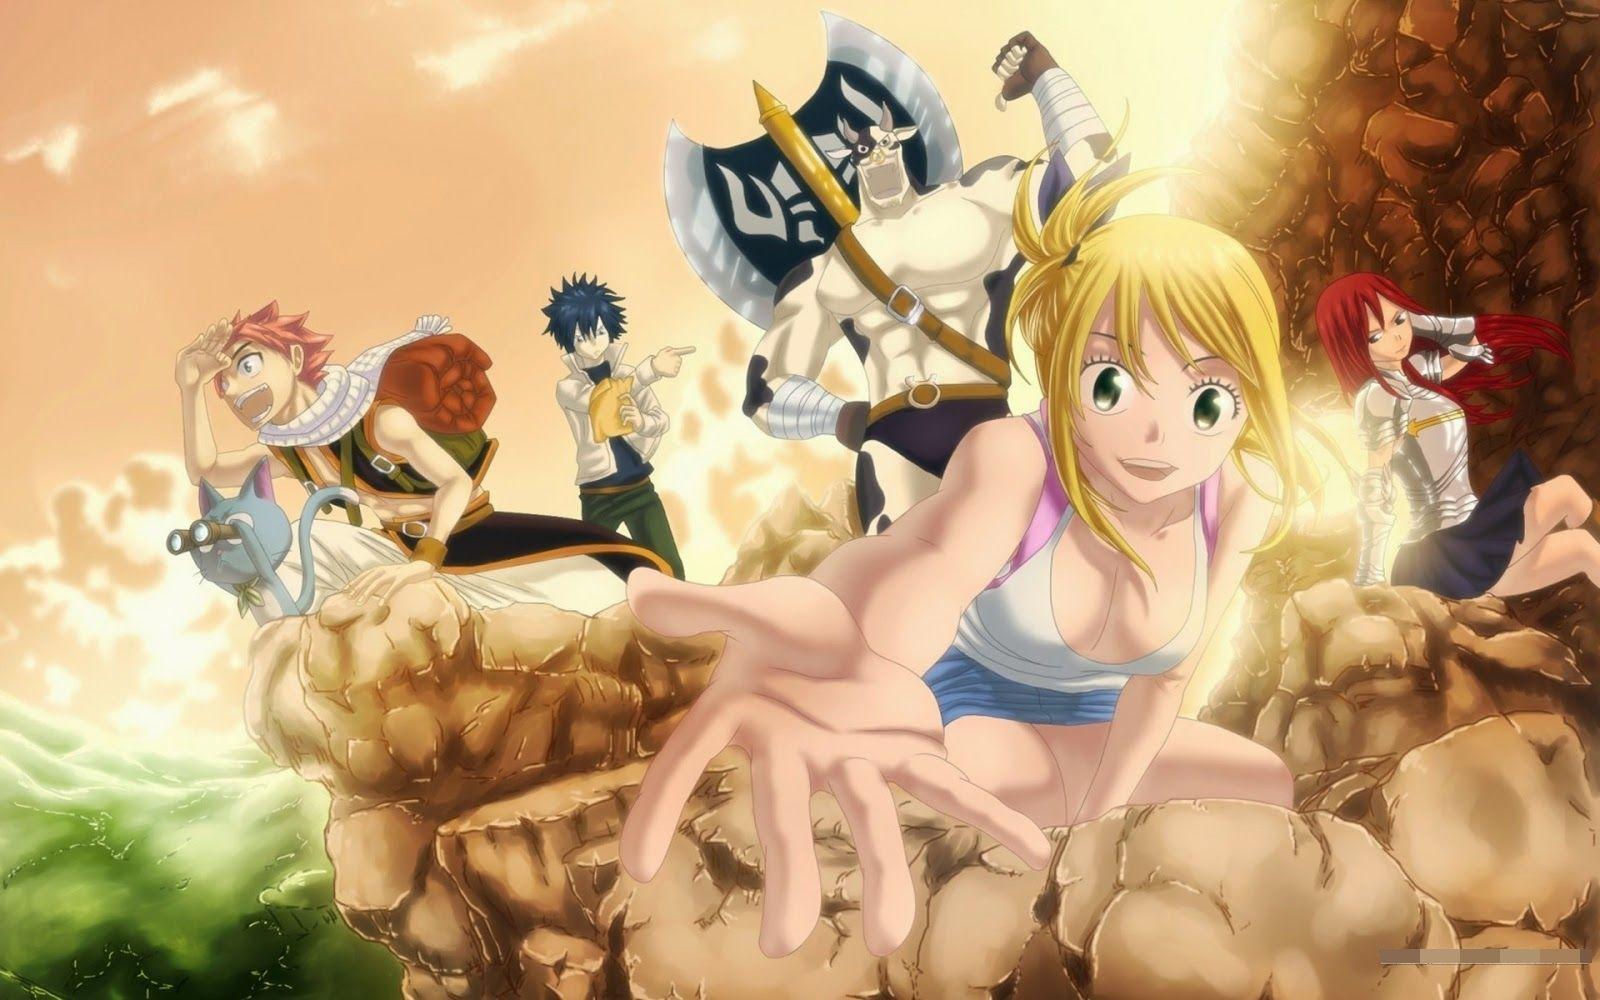 Fairy Tail Natsu, Erza, Lucy and Gray Anime Wallpaper